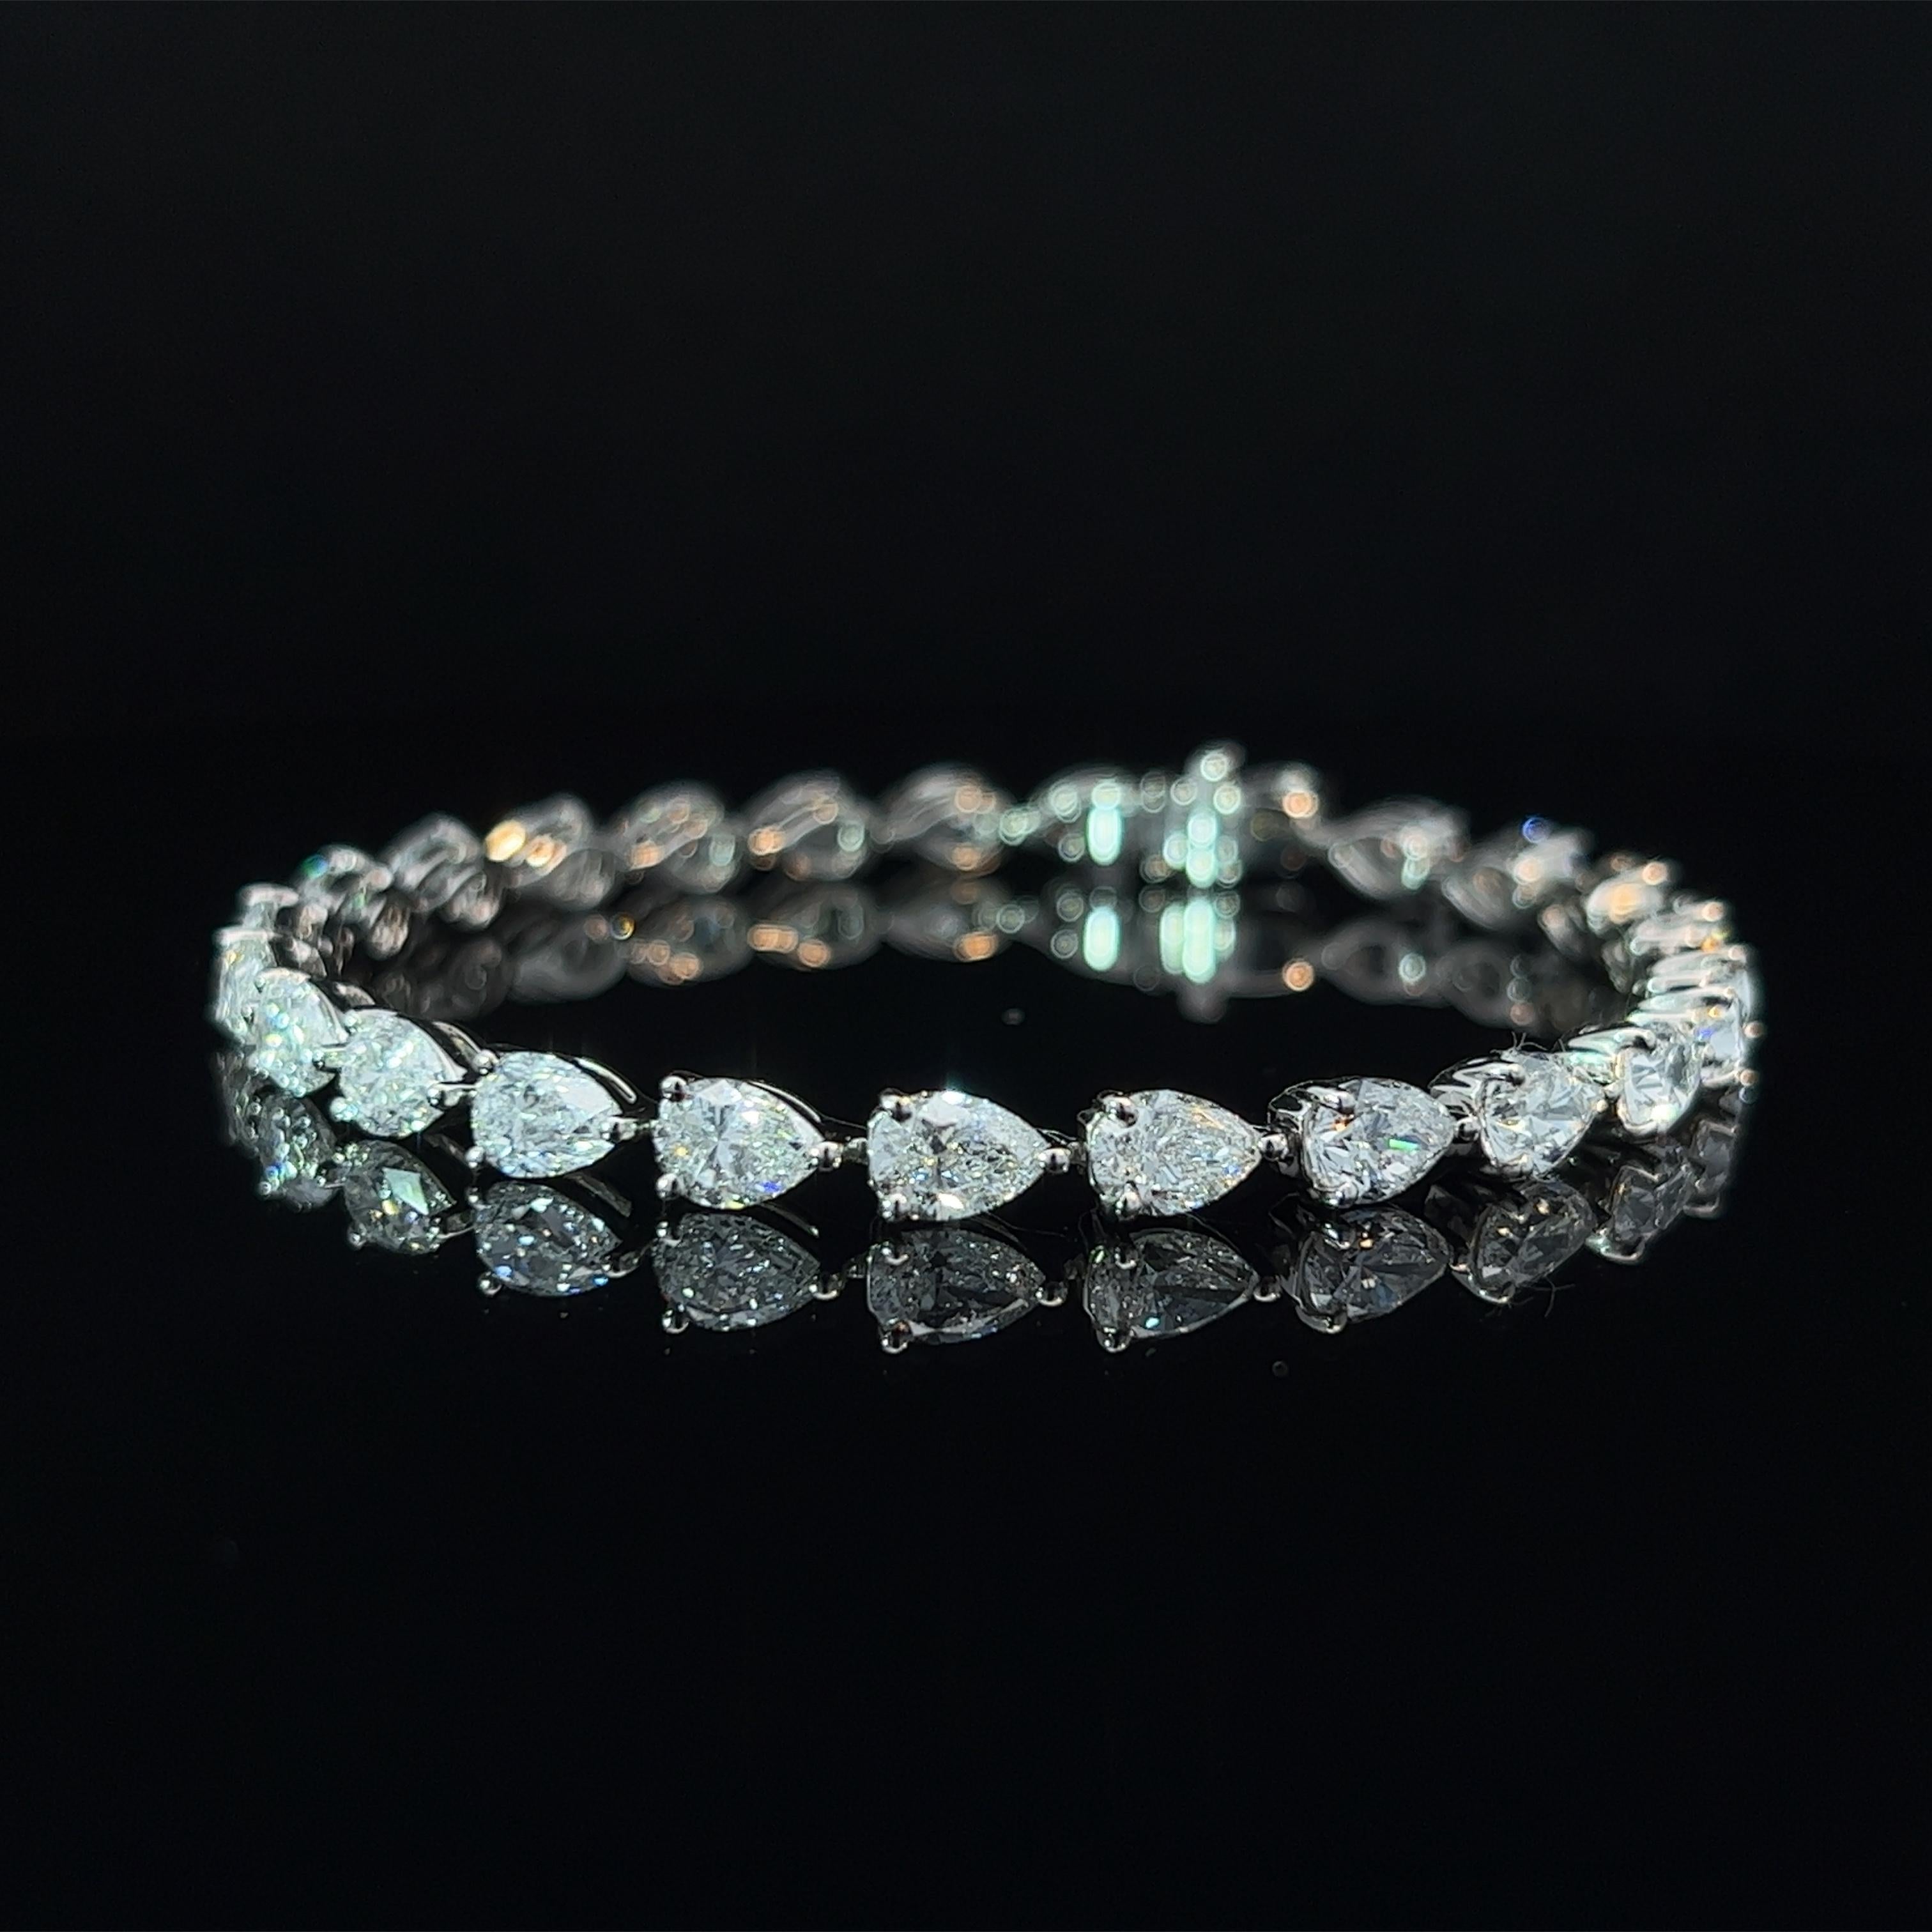 Diamond Shape: Pear Cut 
Total Diamond Weight: 12.58ct
Individual Diamond Weight: .50ct
Color/Clarity: FG VVS  
Metal: PT950  
Metal Weight: 15.52g 

Key Features:

Pear-Cut Diamonds: The centerpiece of this bracelet showcases a dazzling array of